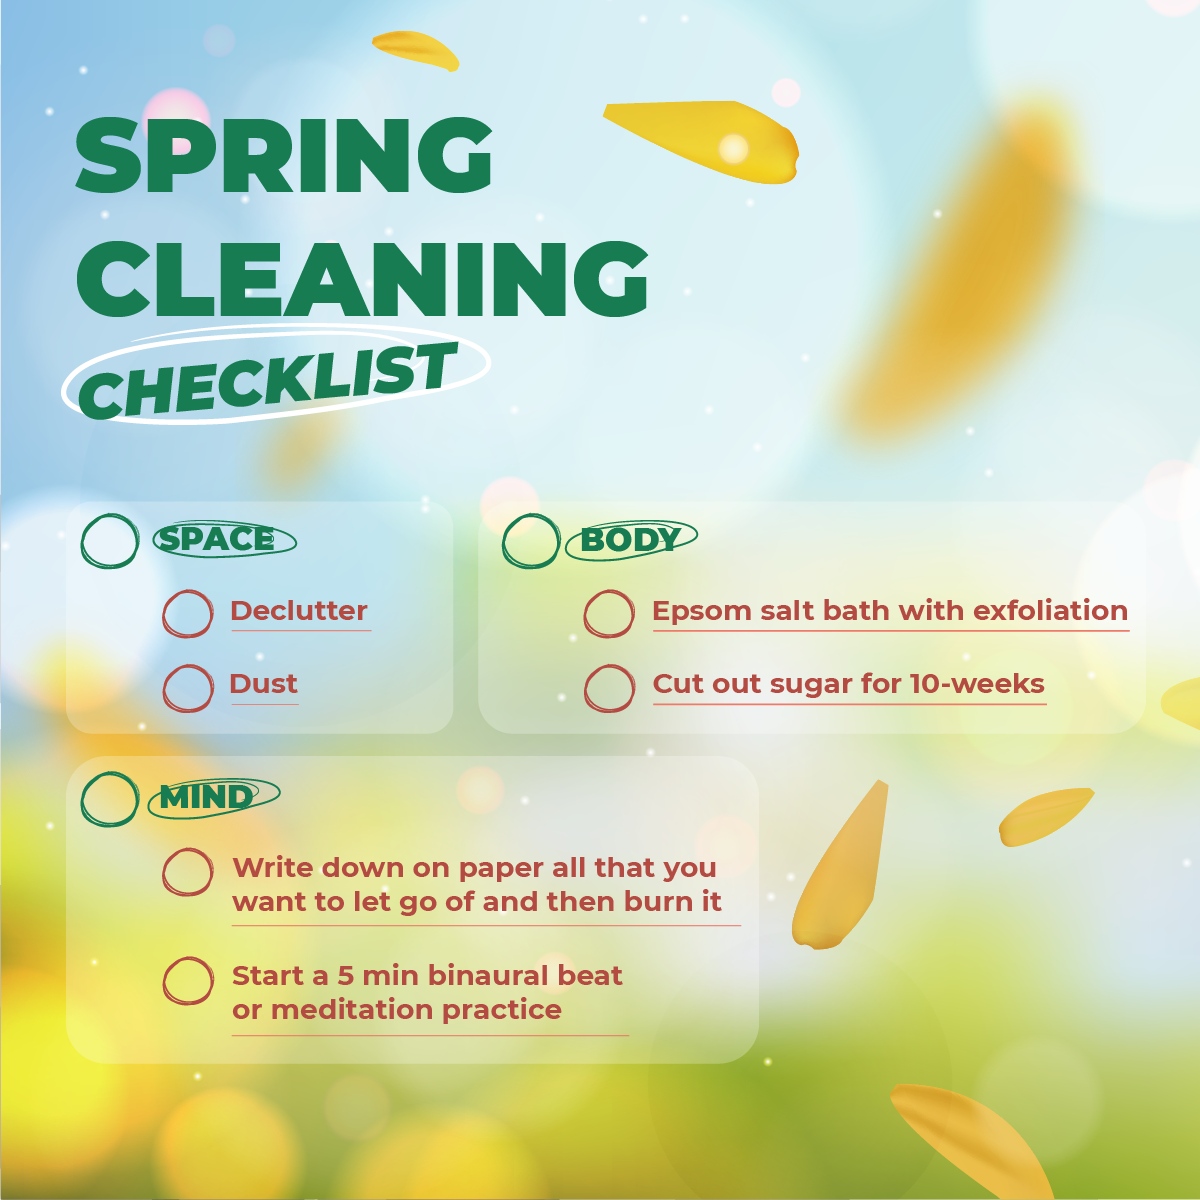 Refresh your space, revitalize your body, and rejuvenate your mind this spring! 🌷✨ 

#SpringCleaningGuide
#RenewYourSpace
#RevitalizeYourBody
#RejuvenateYourMind
#SpringRenewal